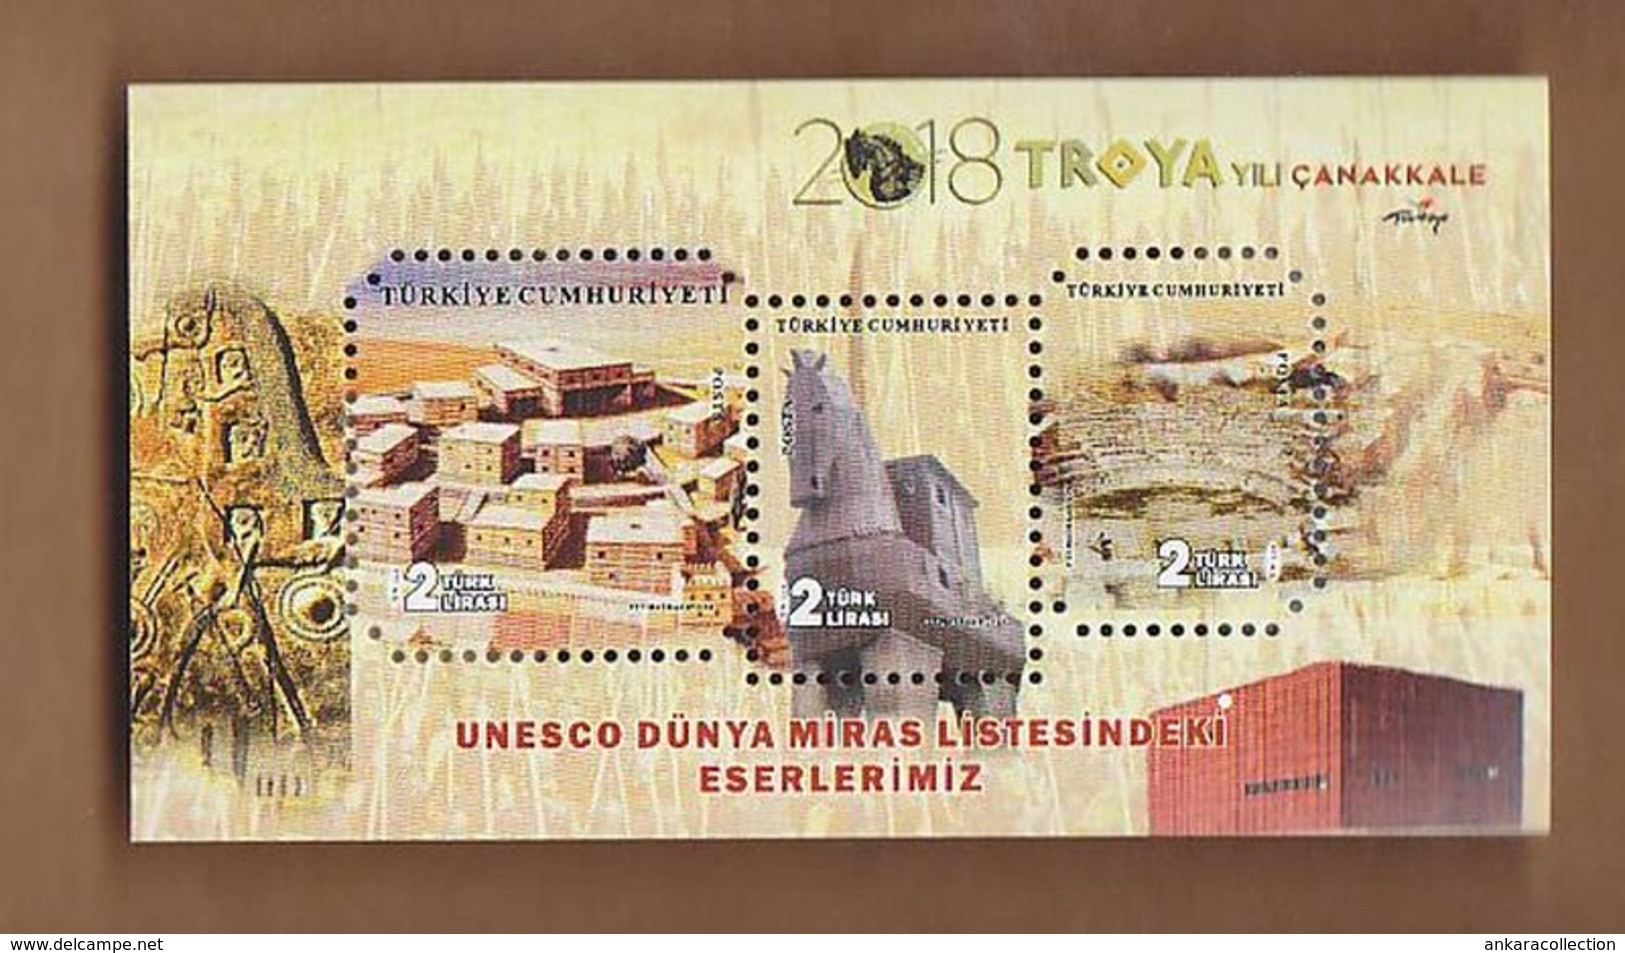 AC - TURKEY BLOCK STAMP - OUR SITES IN UNESCO WORLD HERITAGE LIST TROY TROJAN HORSE CANAKKALE MNH 01 AUGUST 2018 - Blocs-feuillets